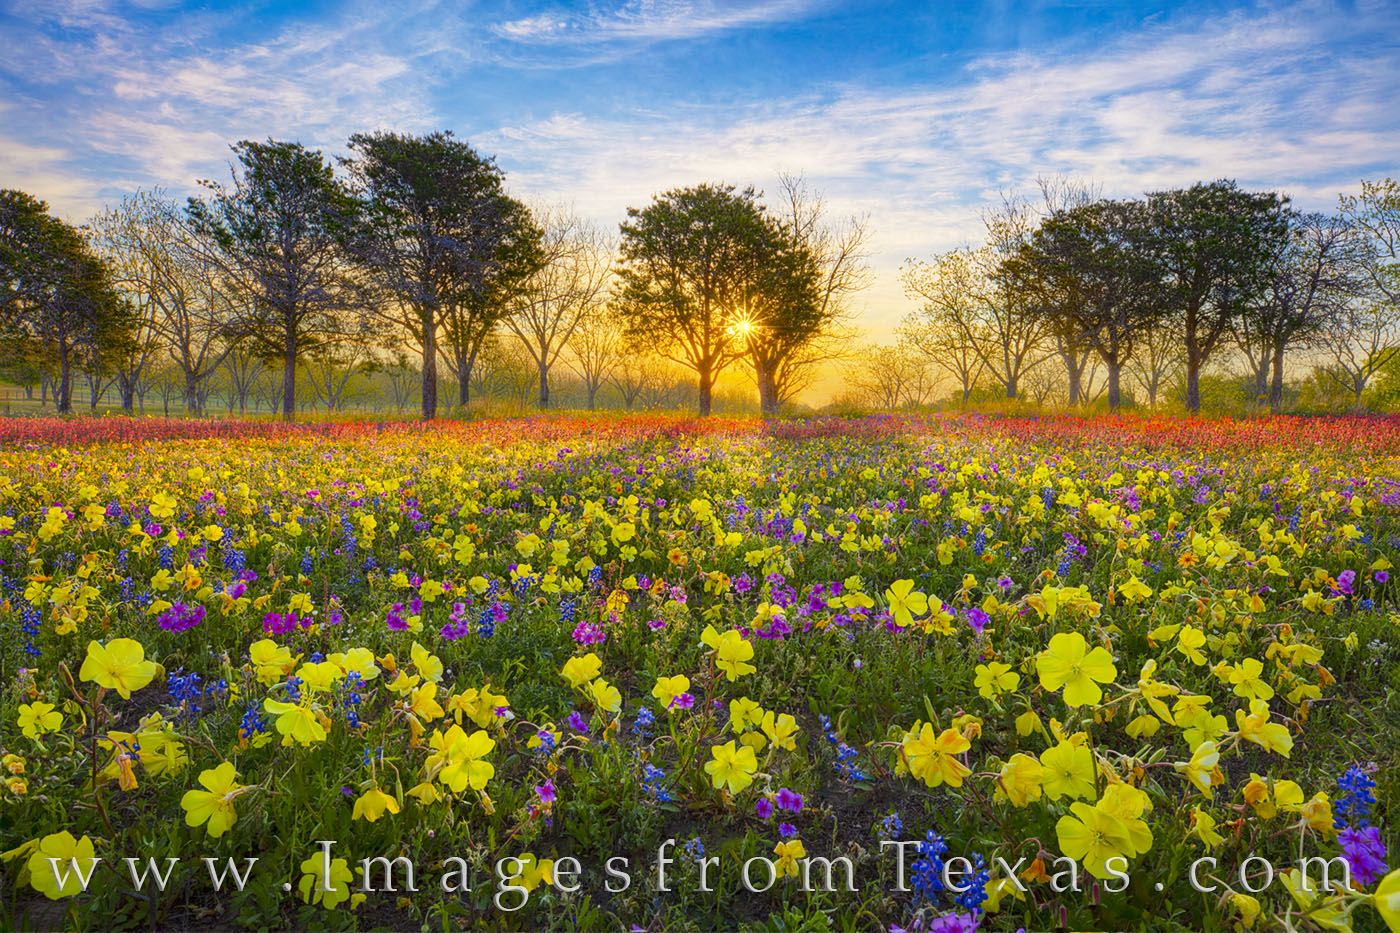 Missouri primrose, also known as yellow buttercups, painted gold across this little patch of country near New Berlin, Texas....